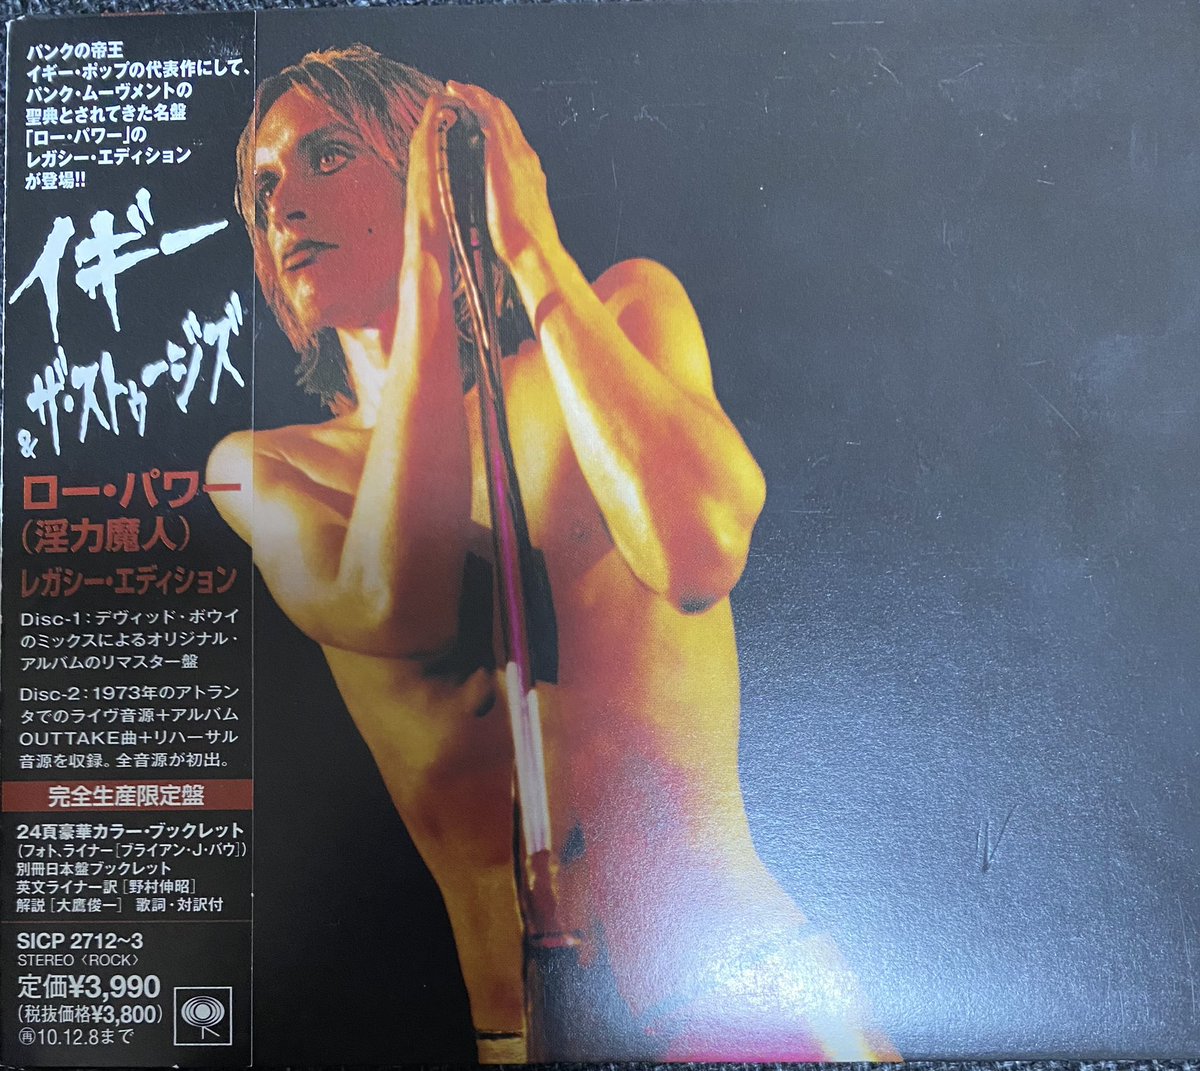 Found today: the expanded edition of Iggy and the Stooges’ classic RAW POWER, featuring the remastered Bowie mix and GEORGIA PEACHES, a live album from 1973. Woohoo! #iggy pop #jameswilliamson #ronasheton #scottasheton #iggyandthestooges #rawpower